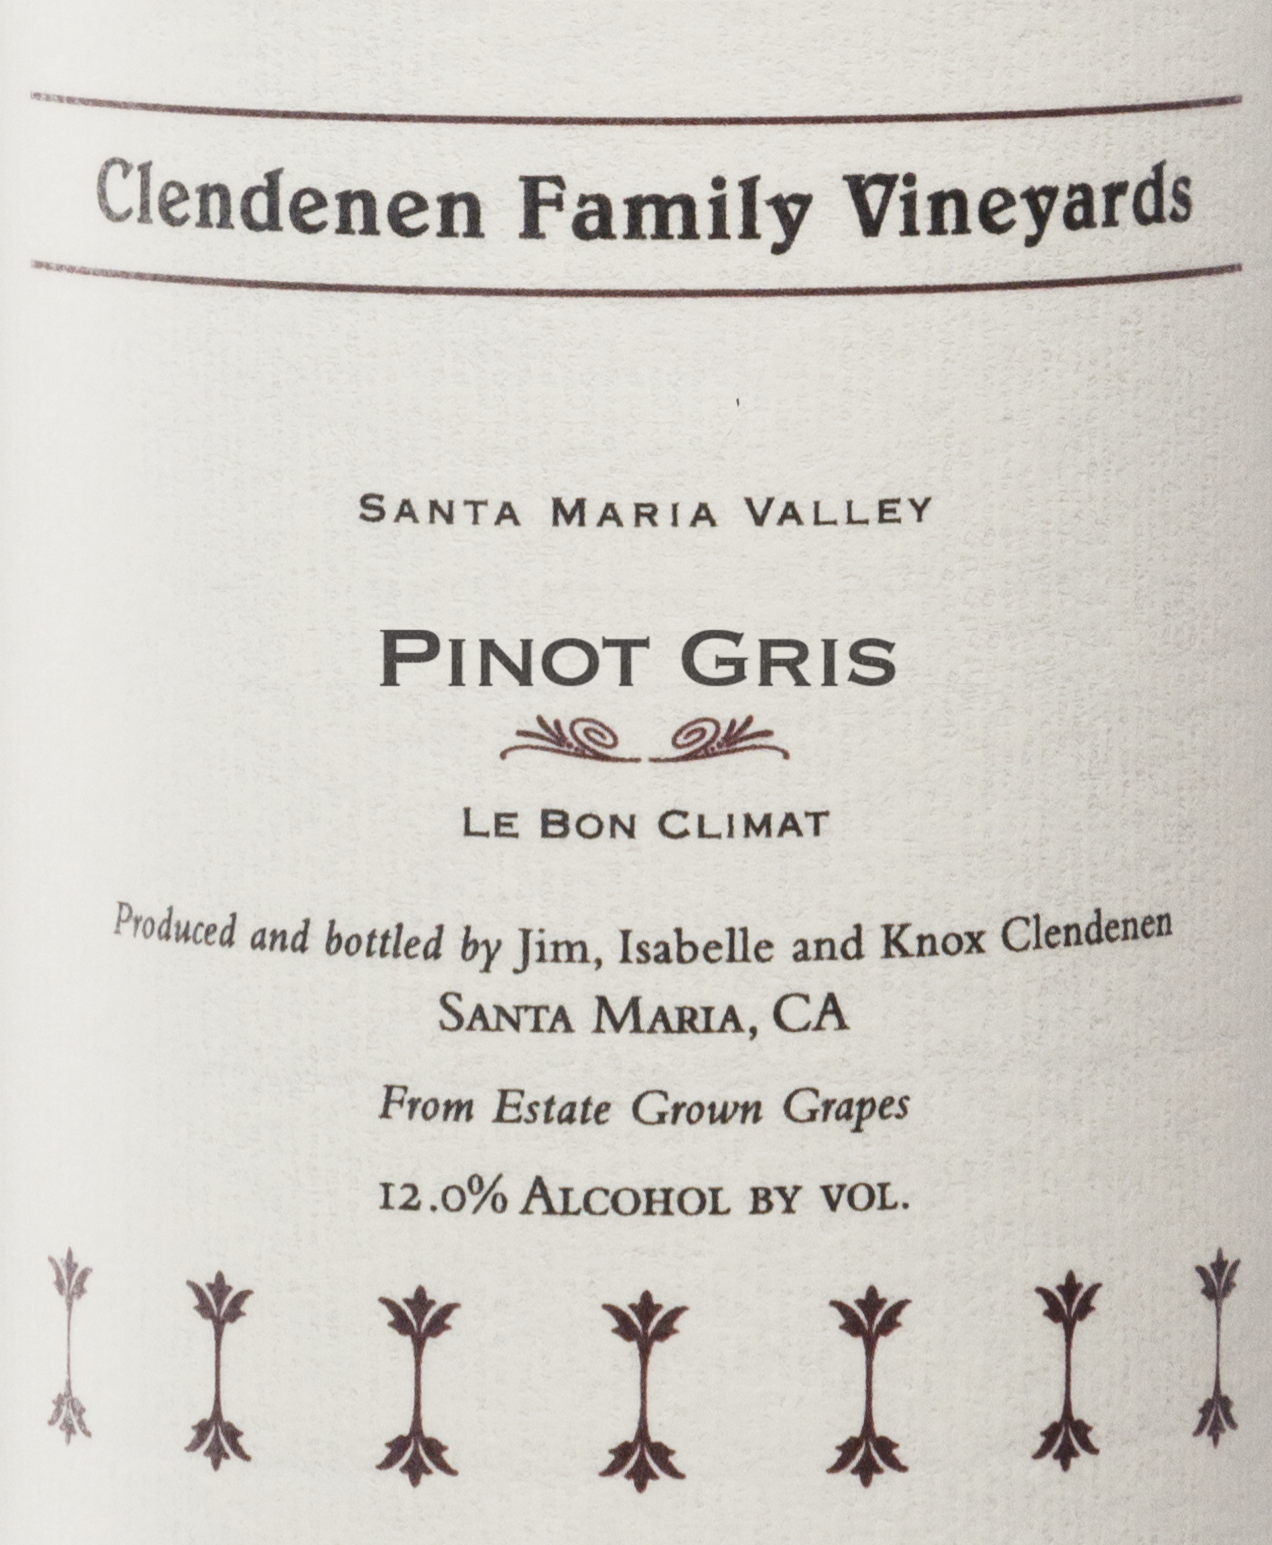 CFV - Pinot Gris - Label